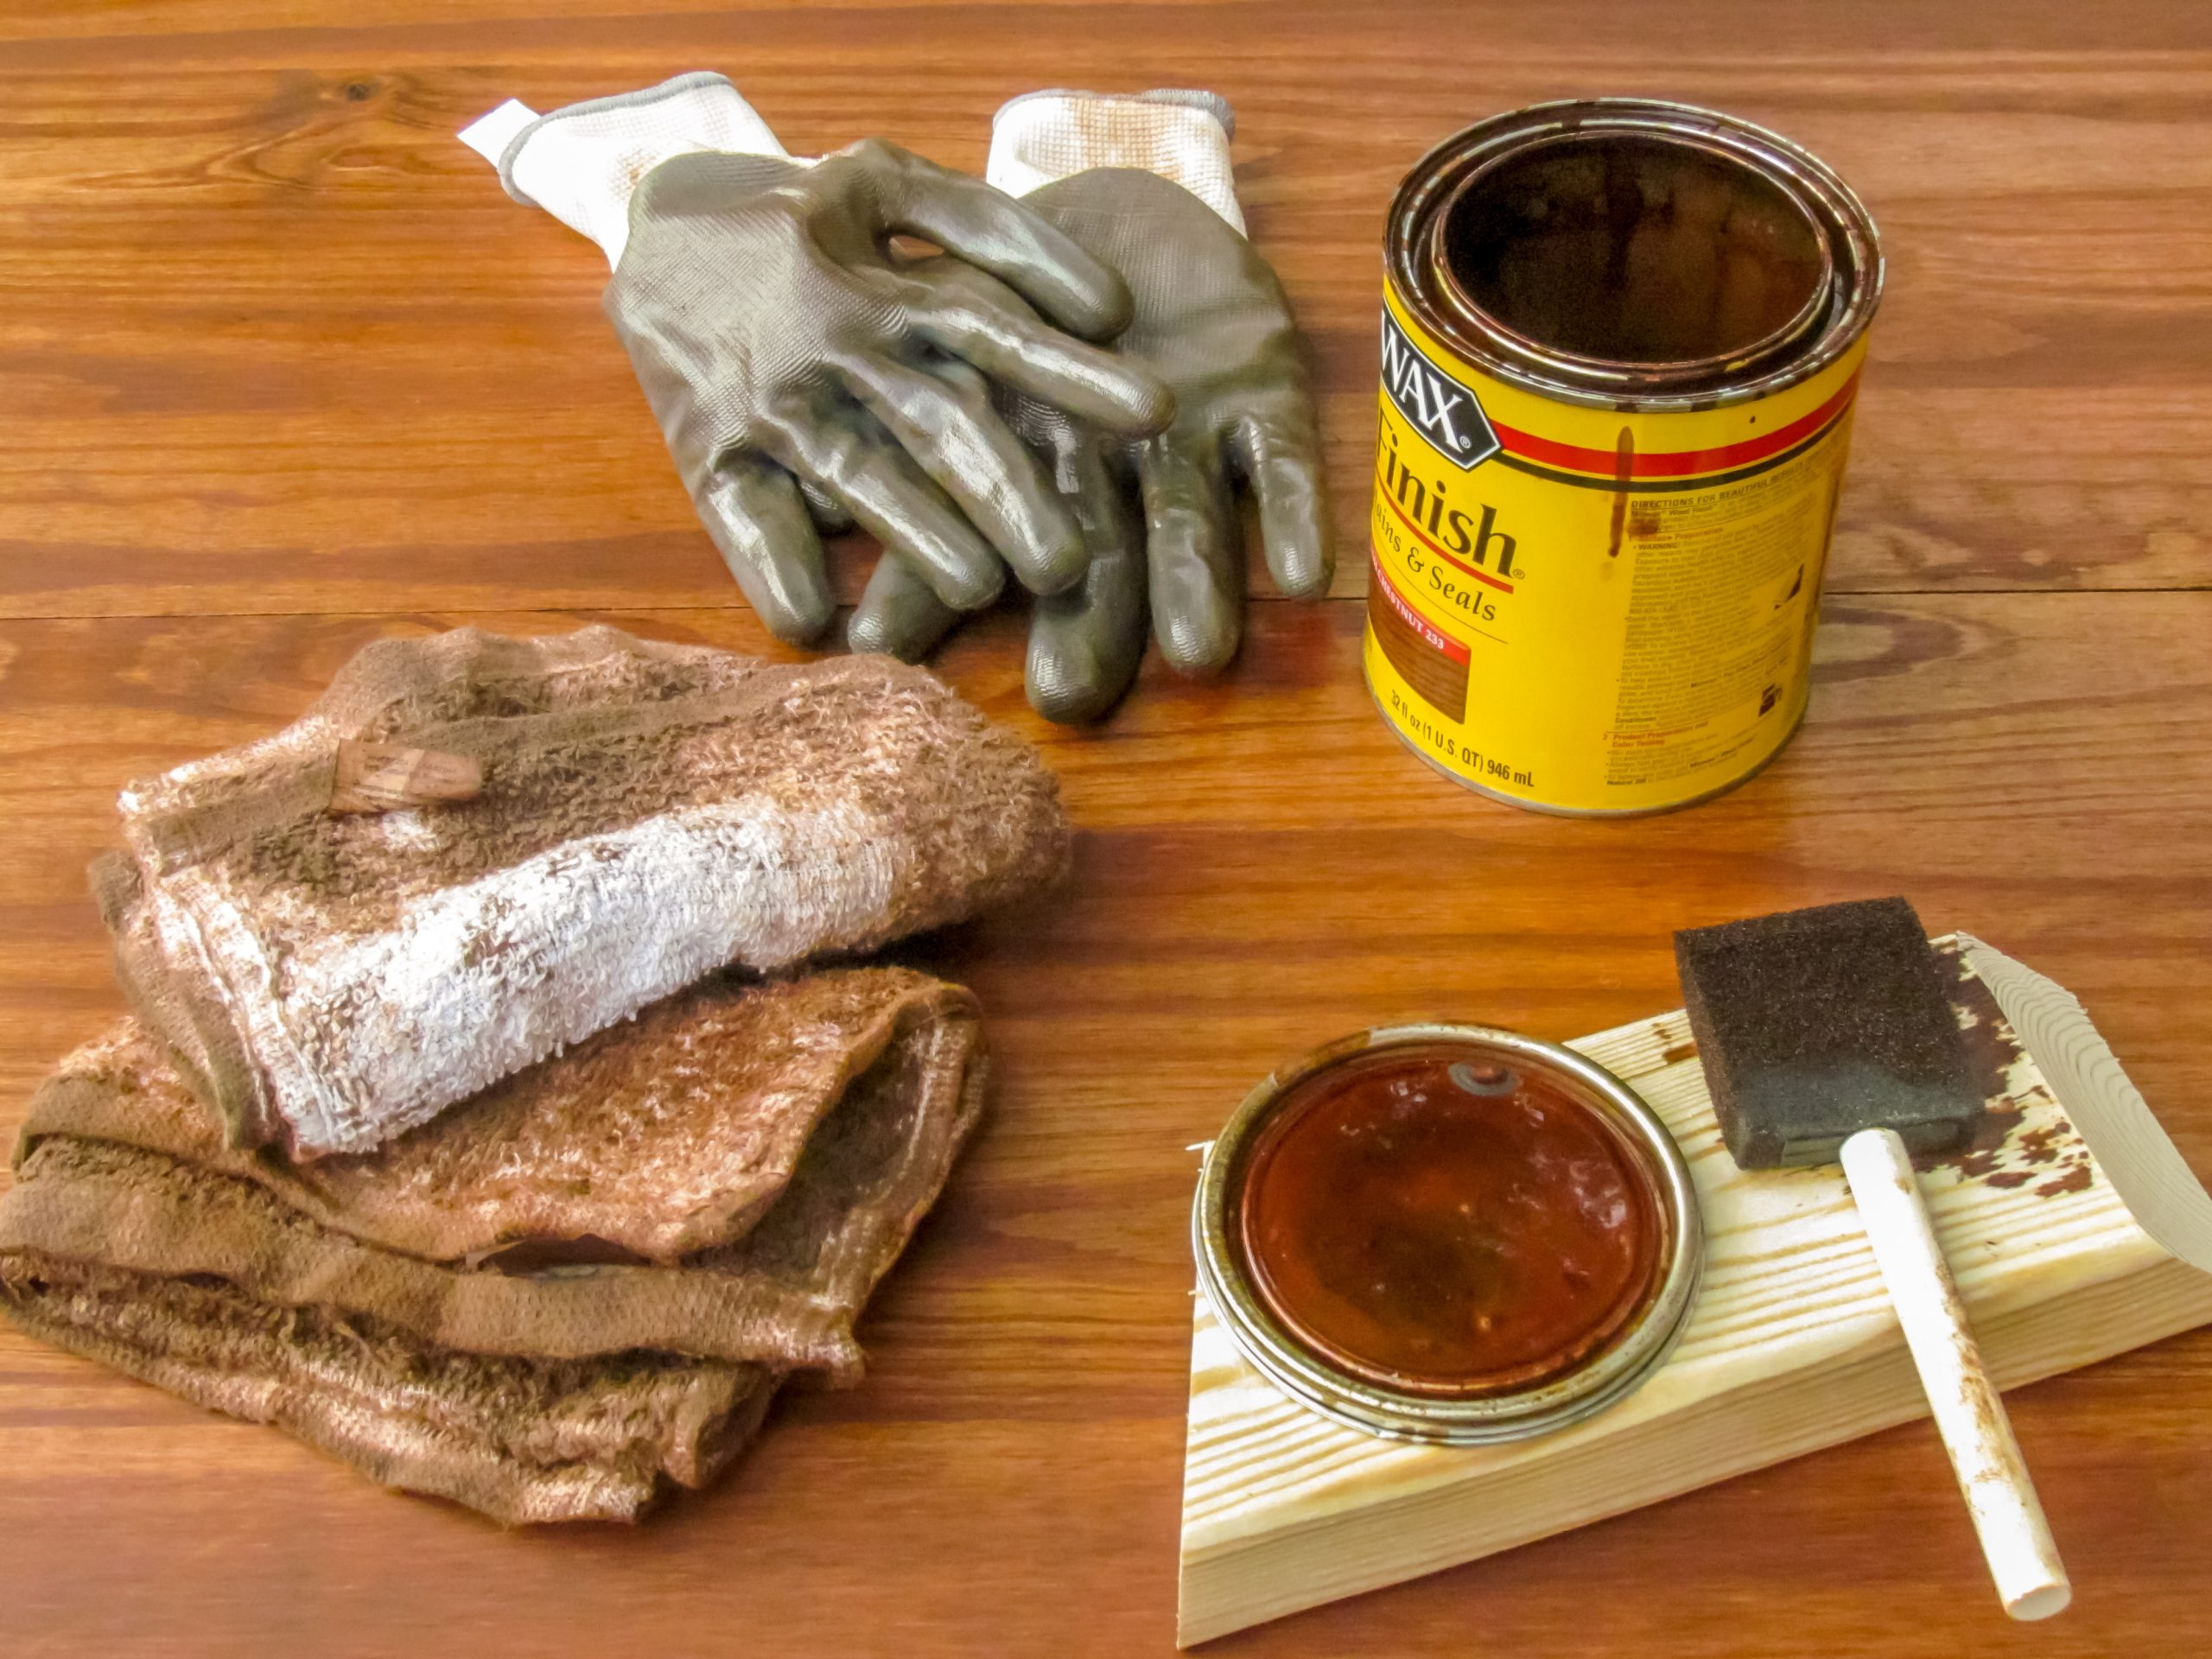 supplies for staining wood